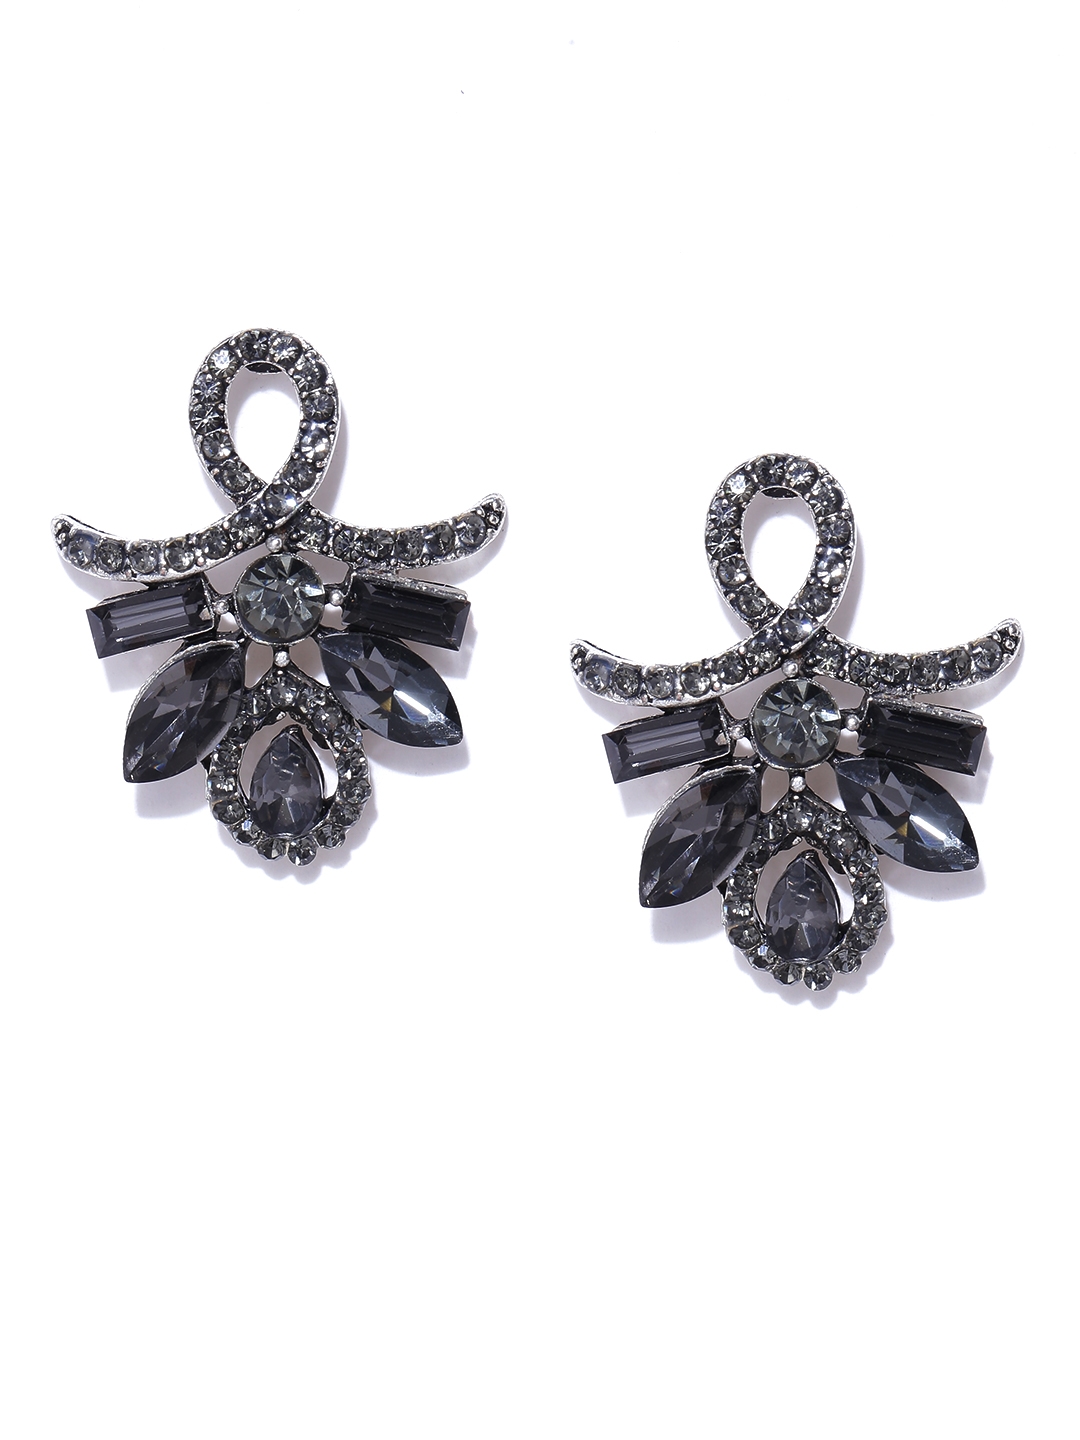 Grey Earrings Online Shopping for Women at Low Prices